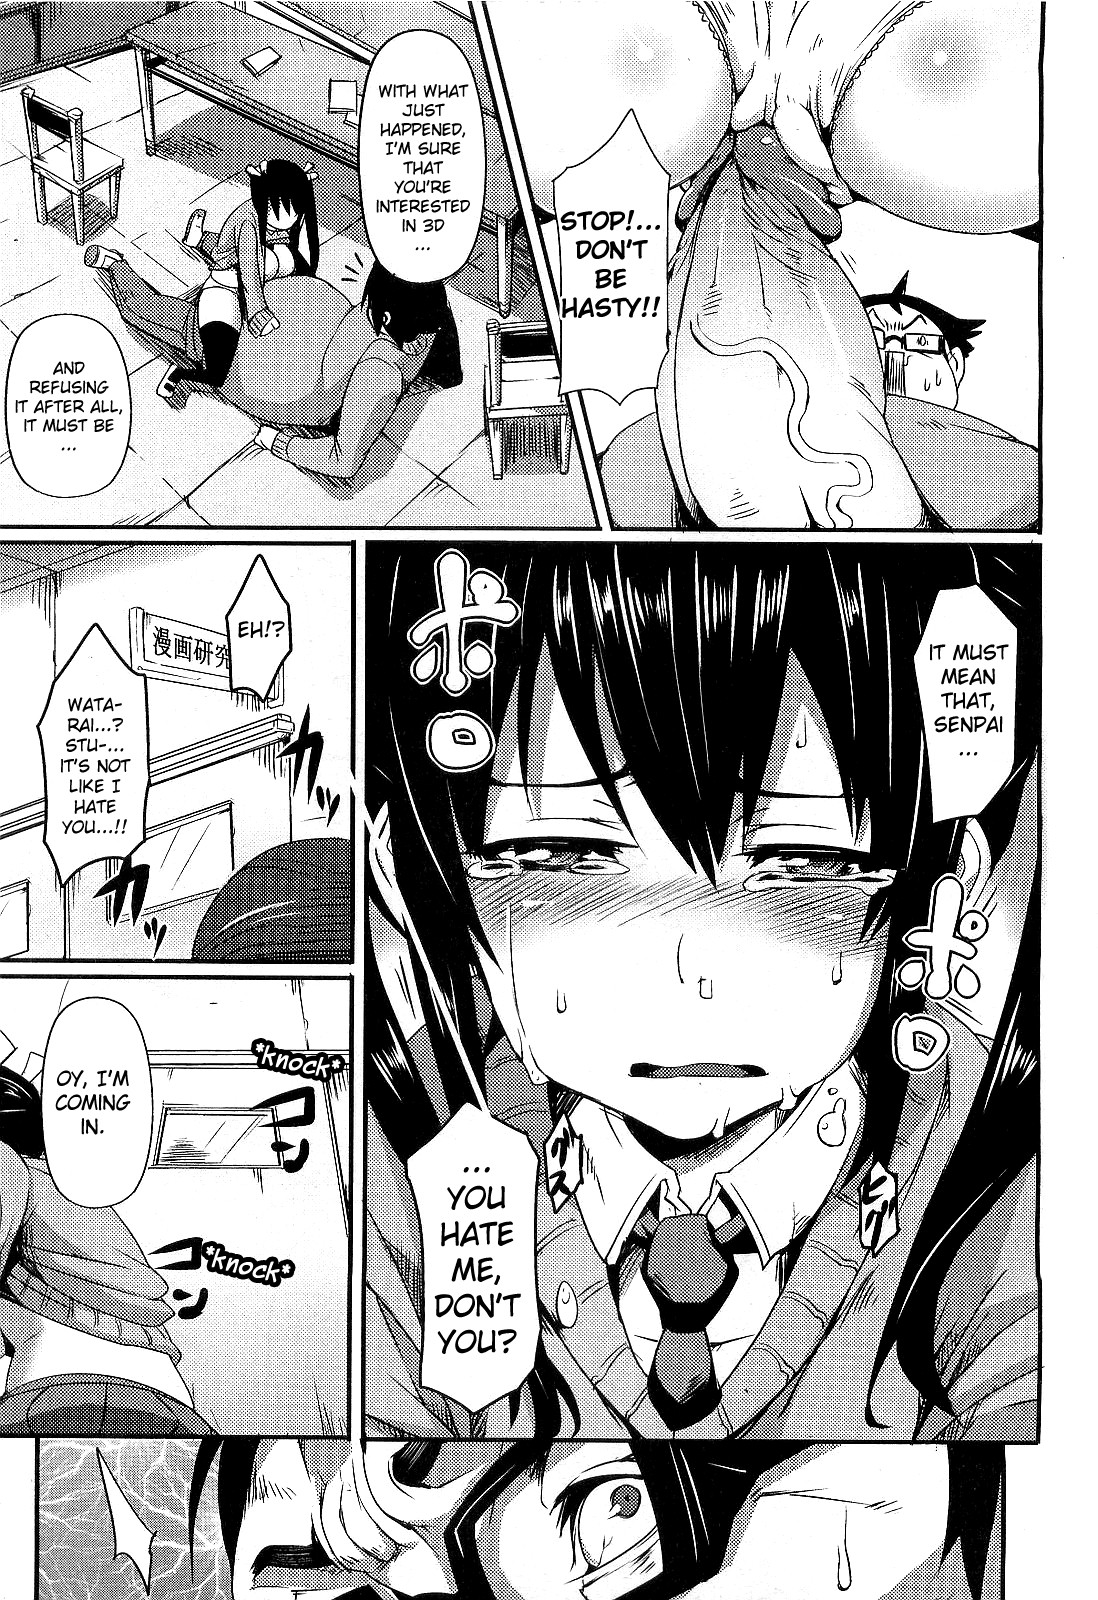 [Hitagiri] Pizza and the Little Bully [Eng] {doujin-moe.us} 